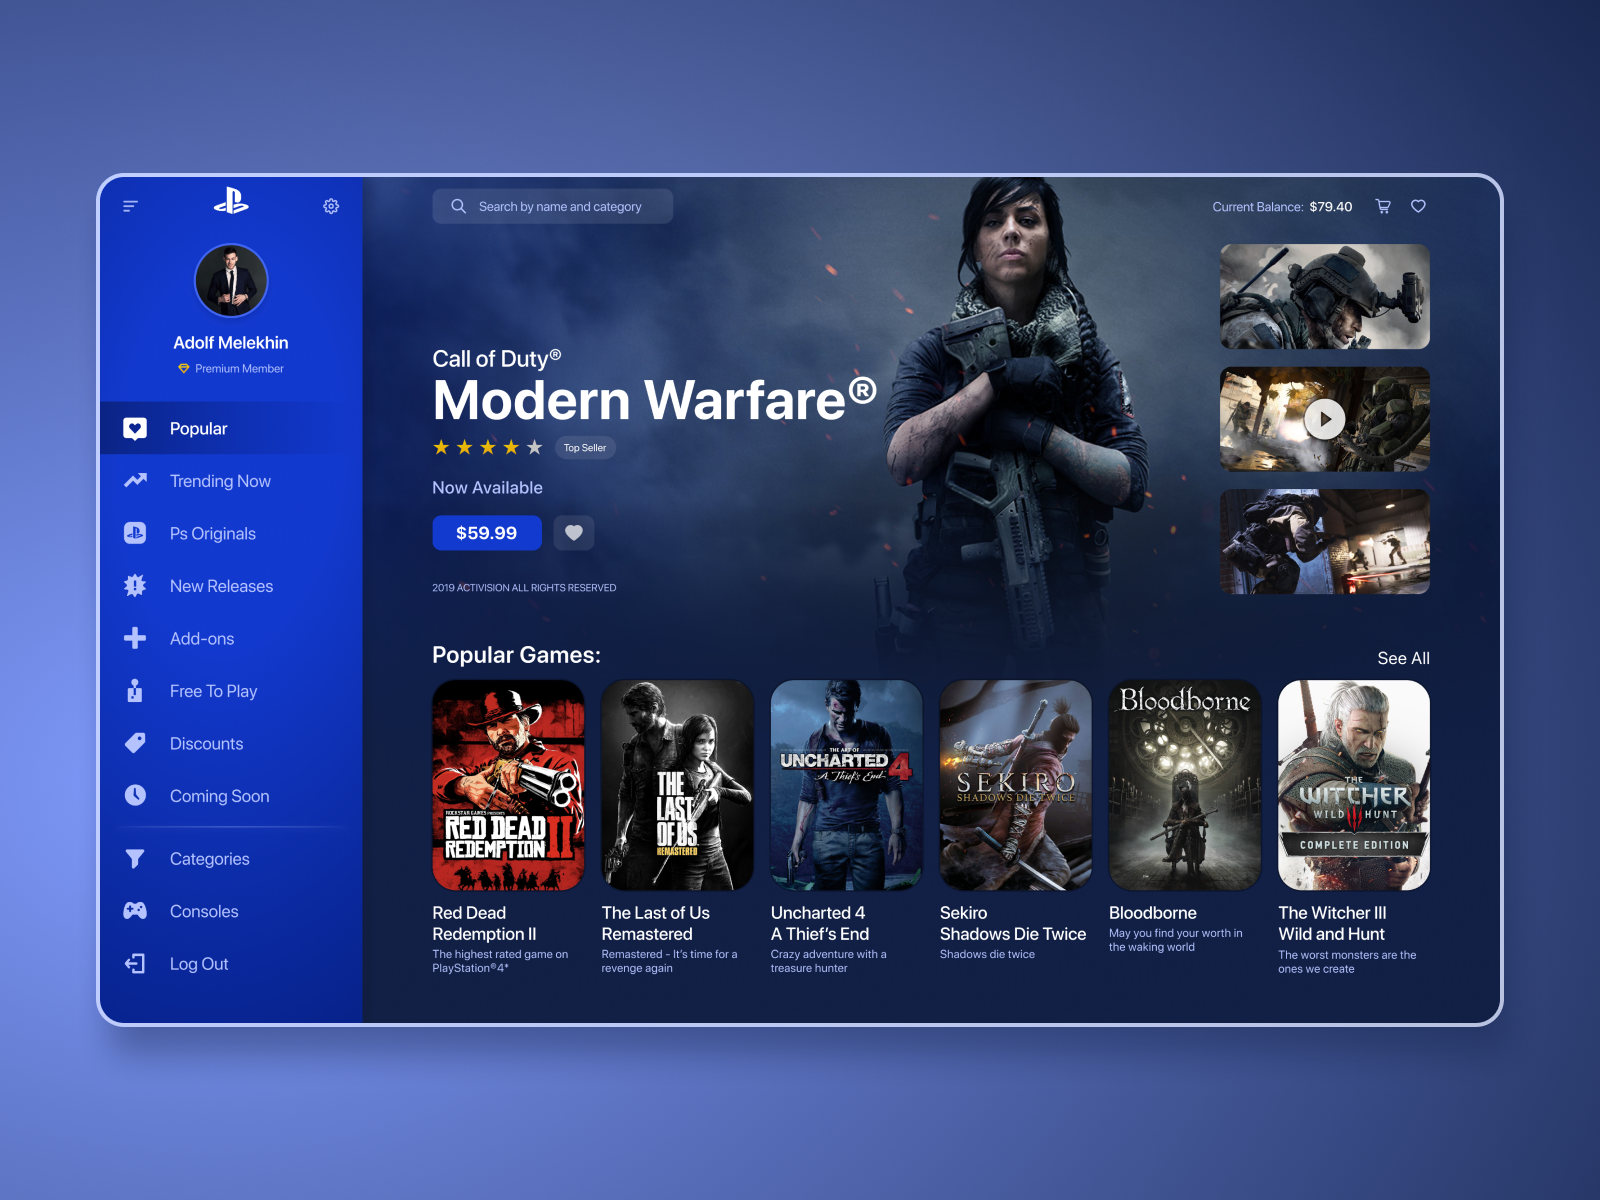 sony ps store